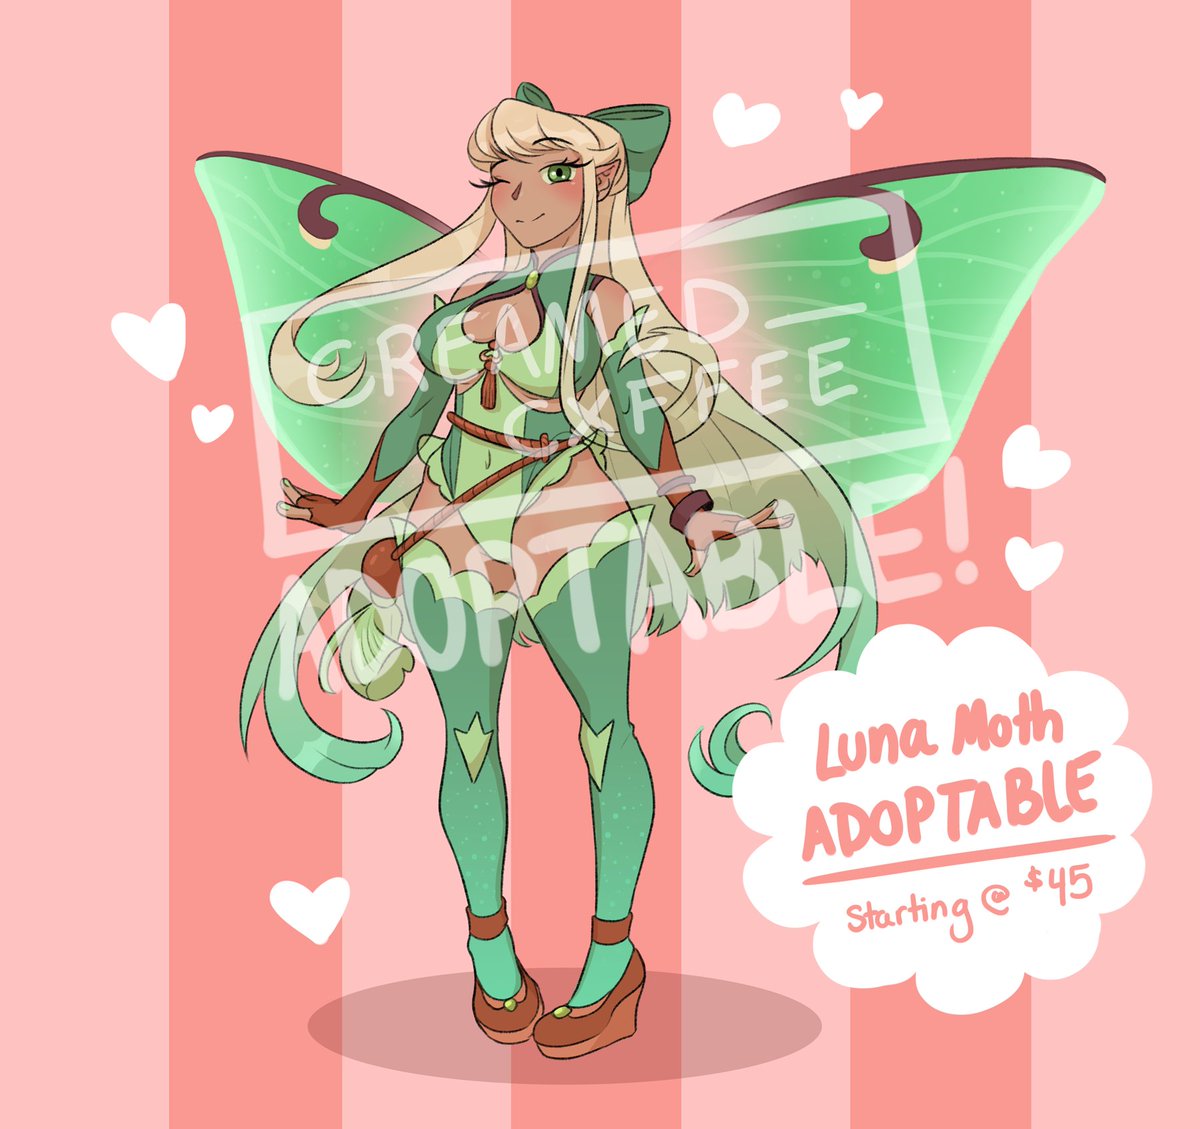 I thought I'd shoot my shot with some nsfw adoptables - with the first one being this luna moth fairy! 
DM if interested, bidding (if multiple people are interested) will end August 20th @ midnight
🦋✨💚 #adoptable #mothfairy #anime